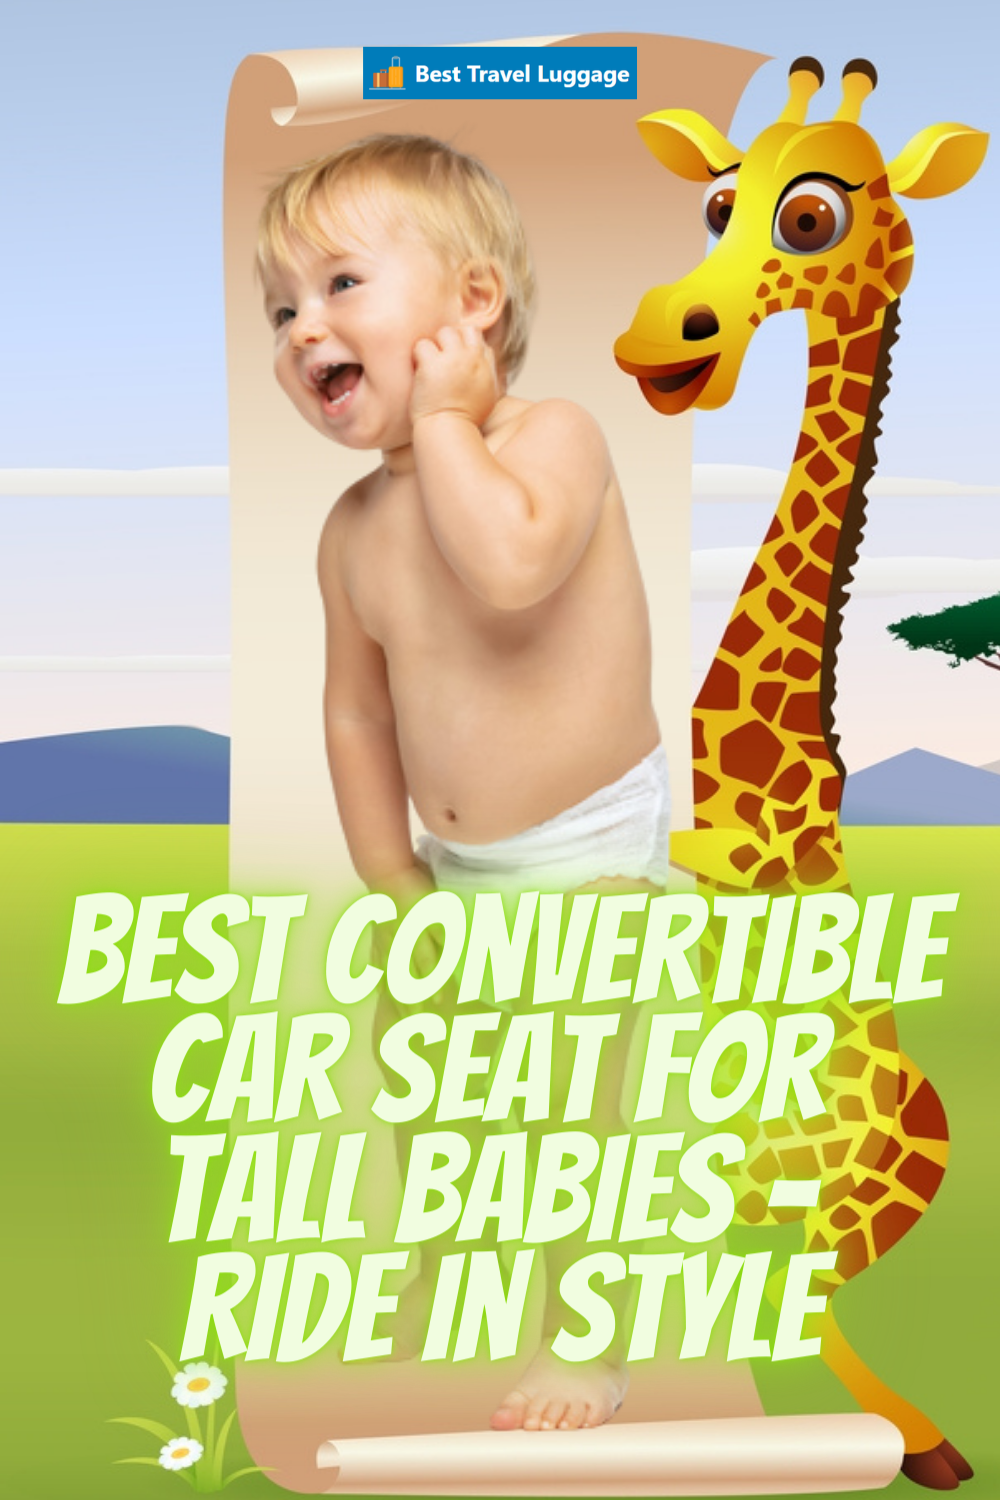 Best Convertible Car Seat For Tall Babies pin